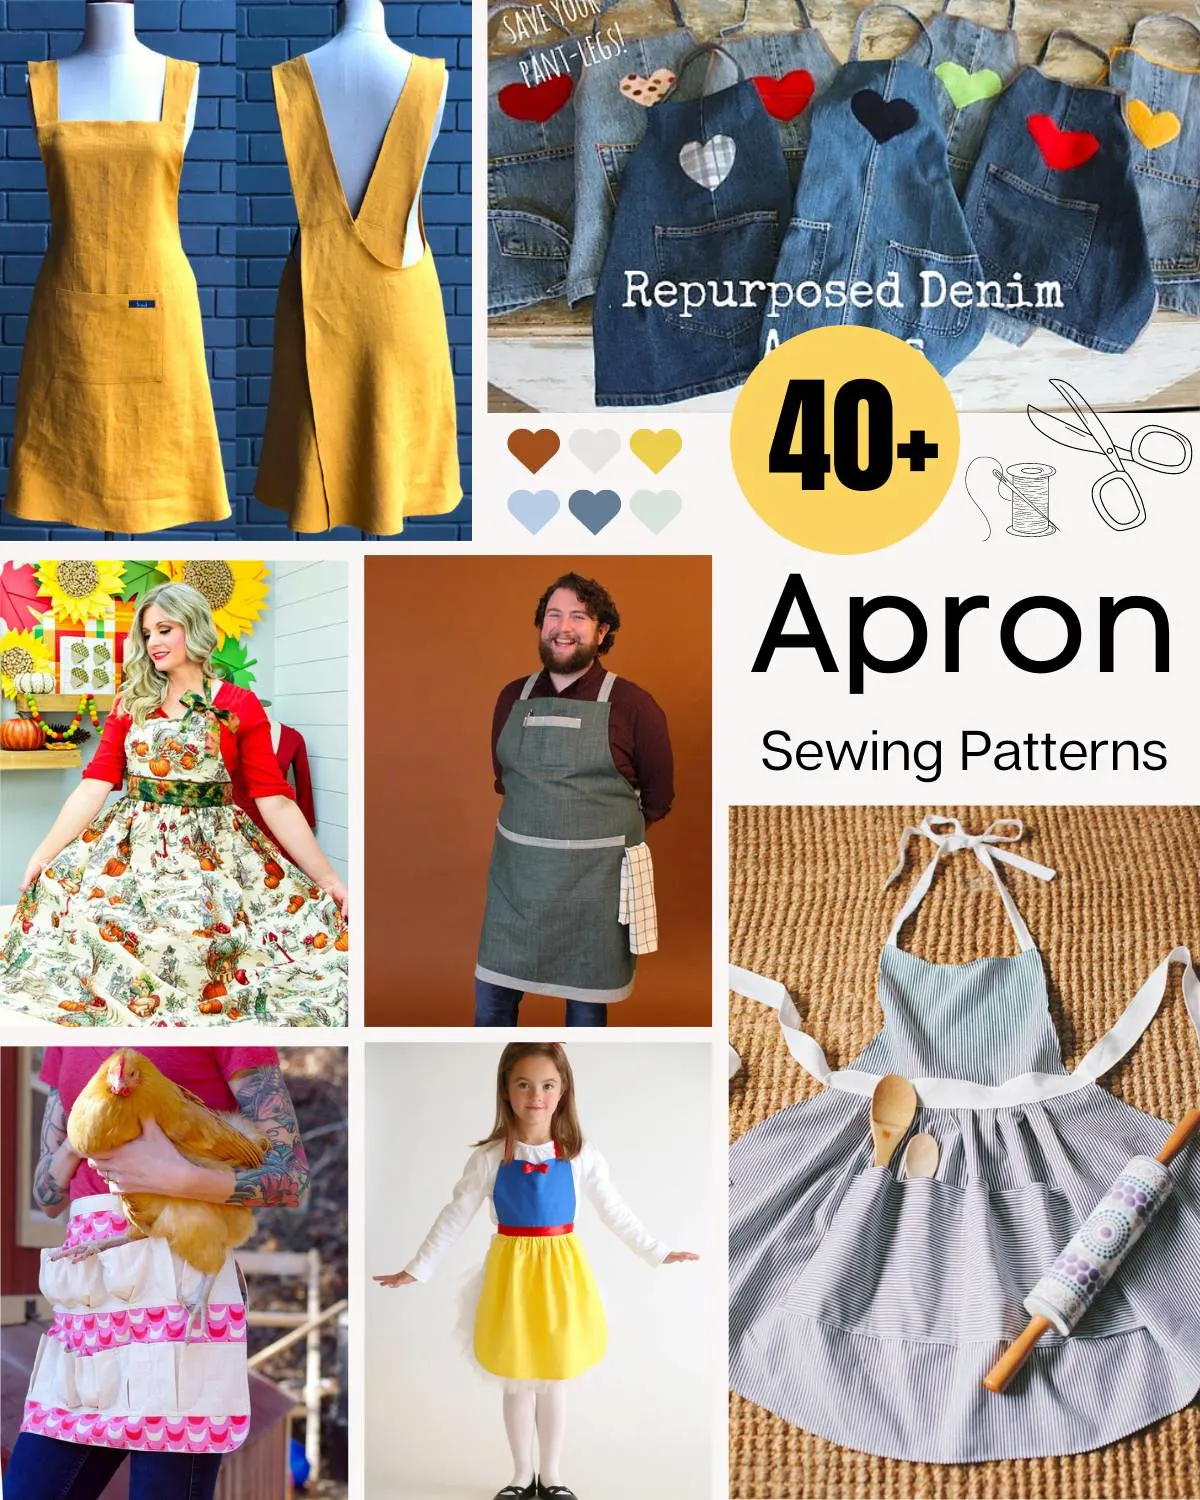 A Cute and Modern Pocket Apron - free sewing tutorial